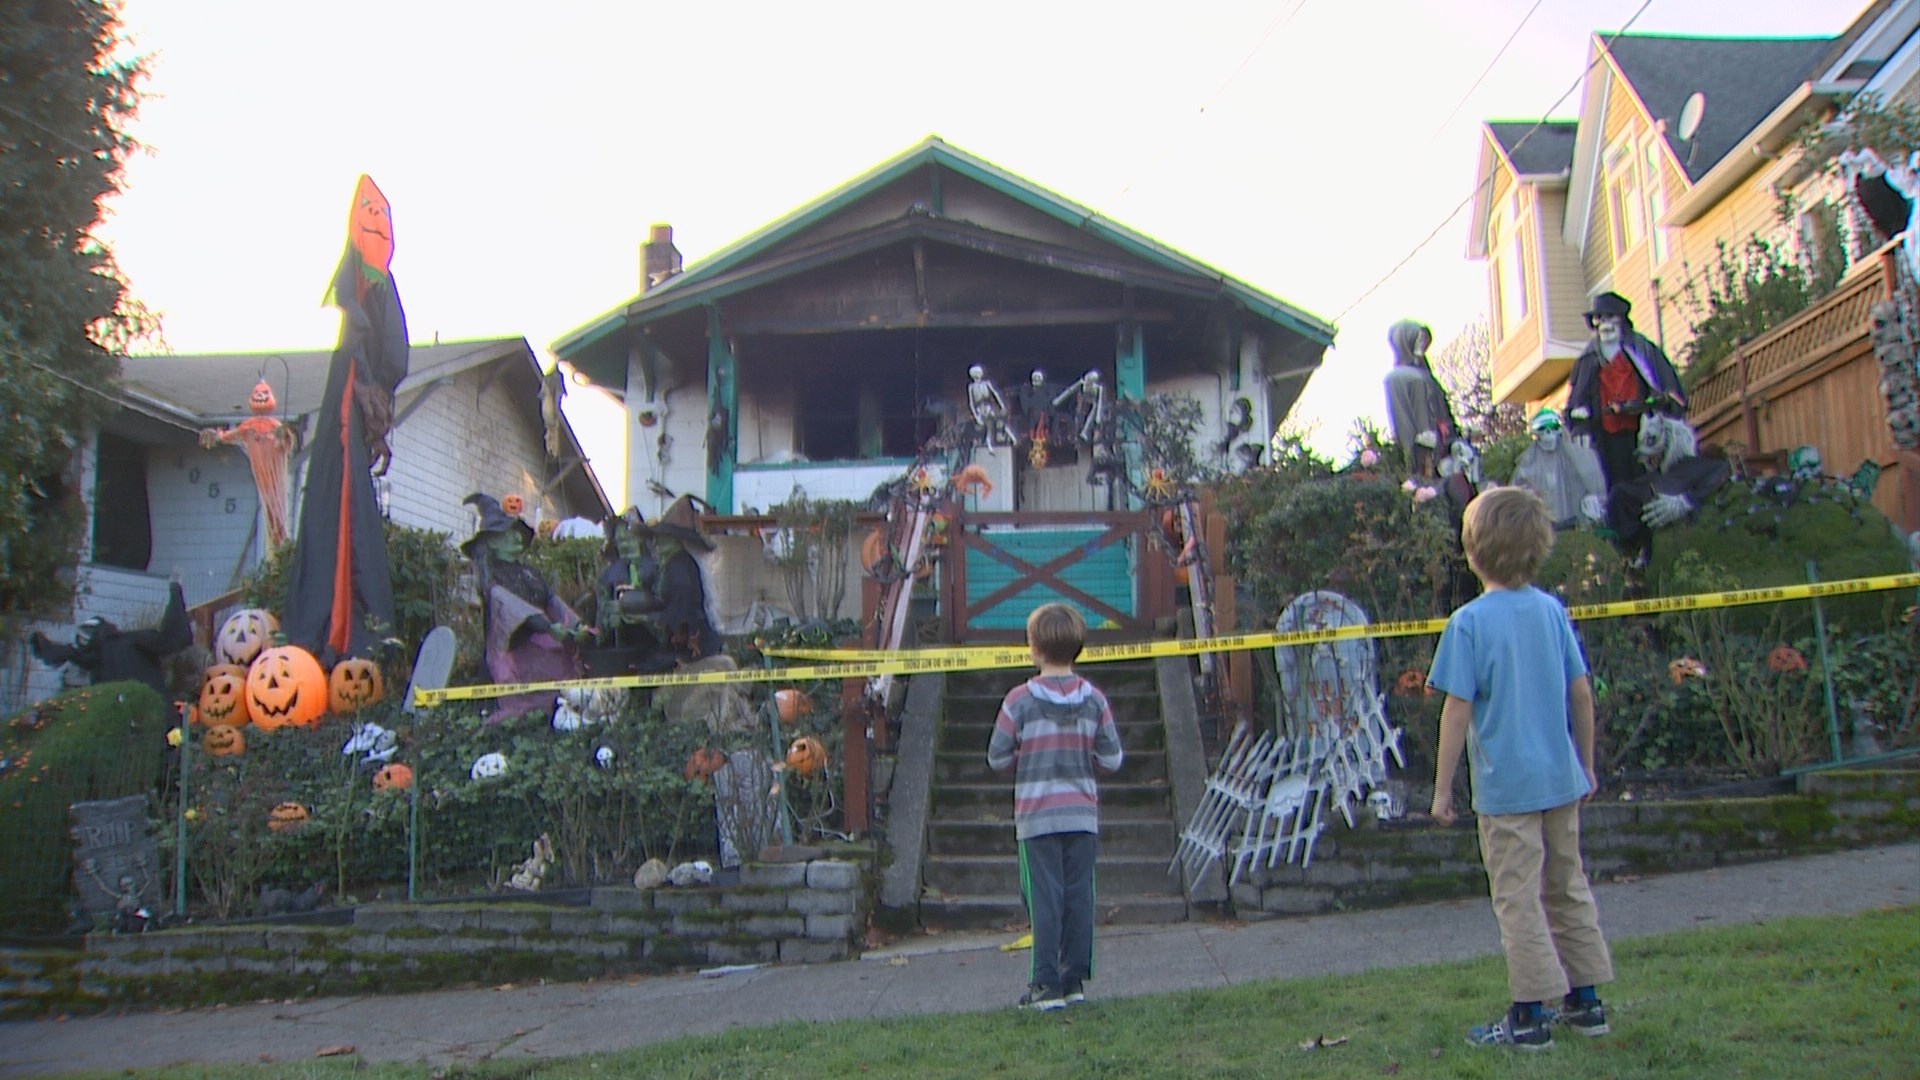 Neighbors rally around 'Holiday House' after fire